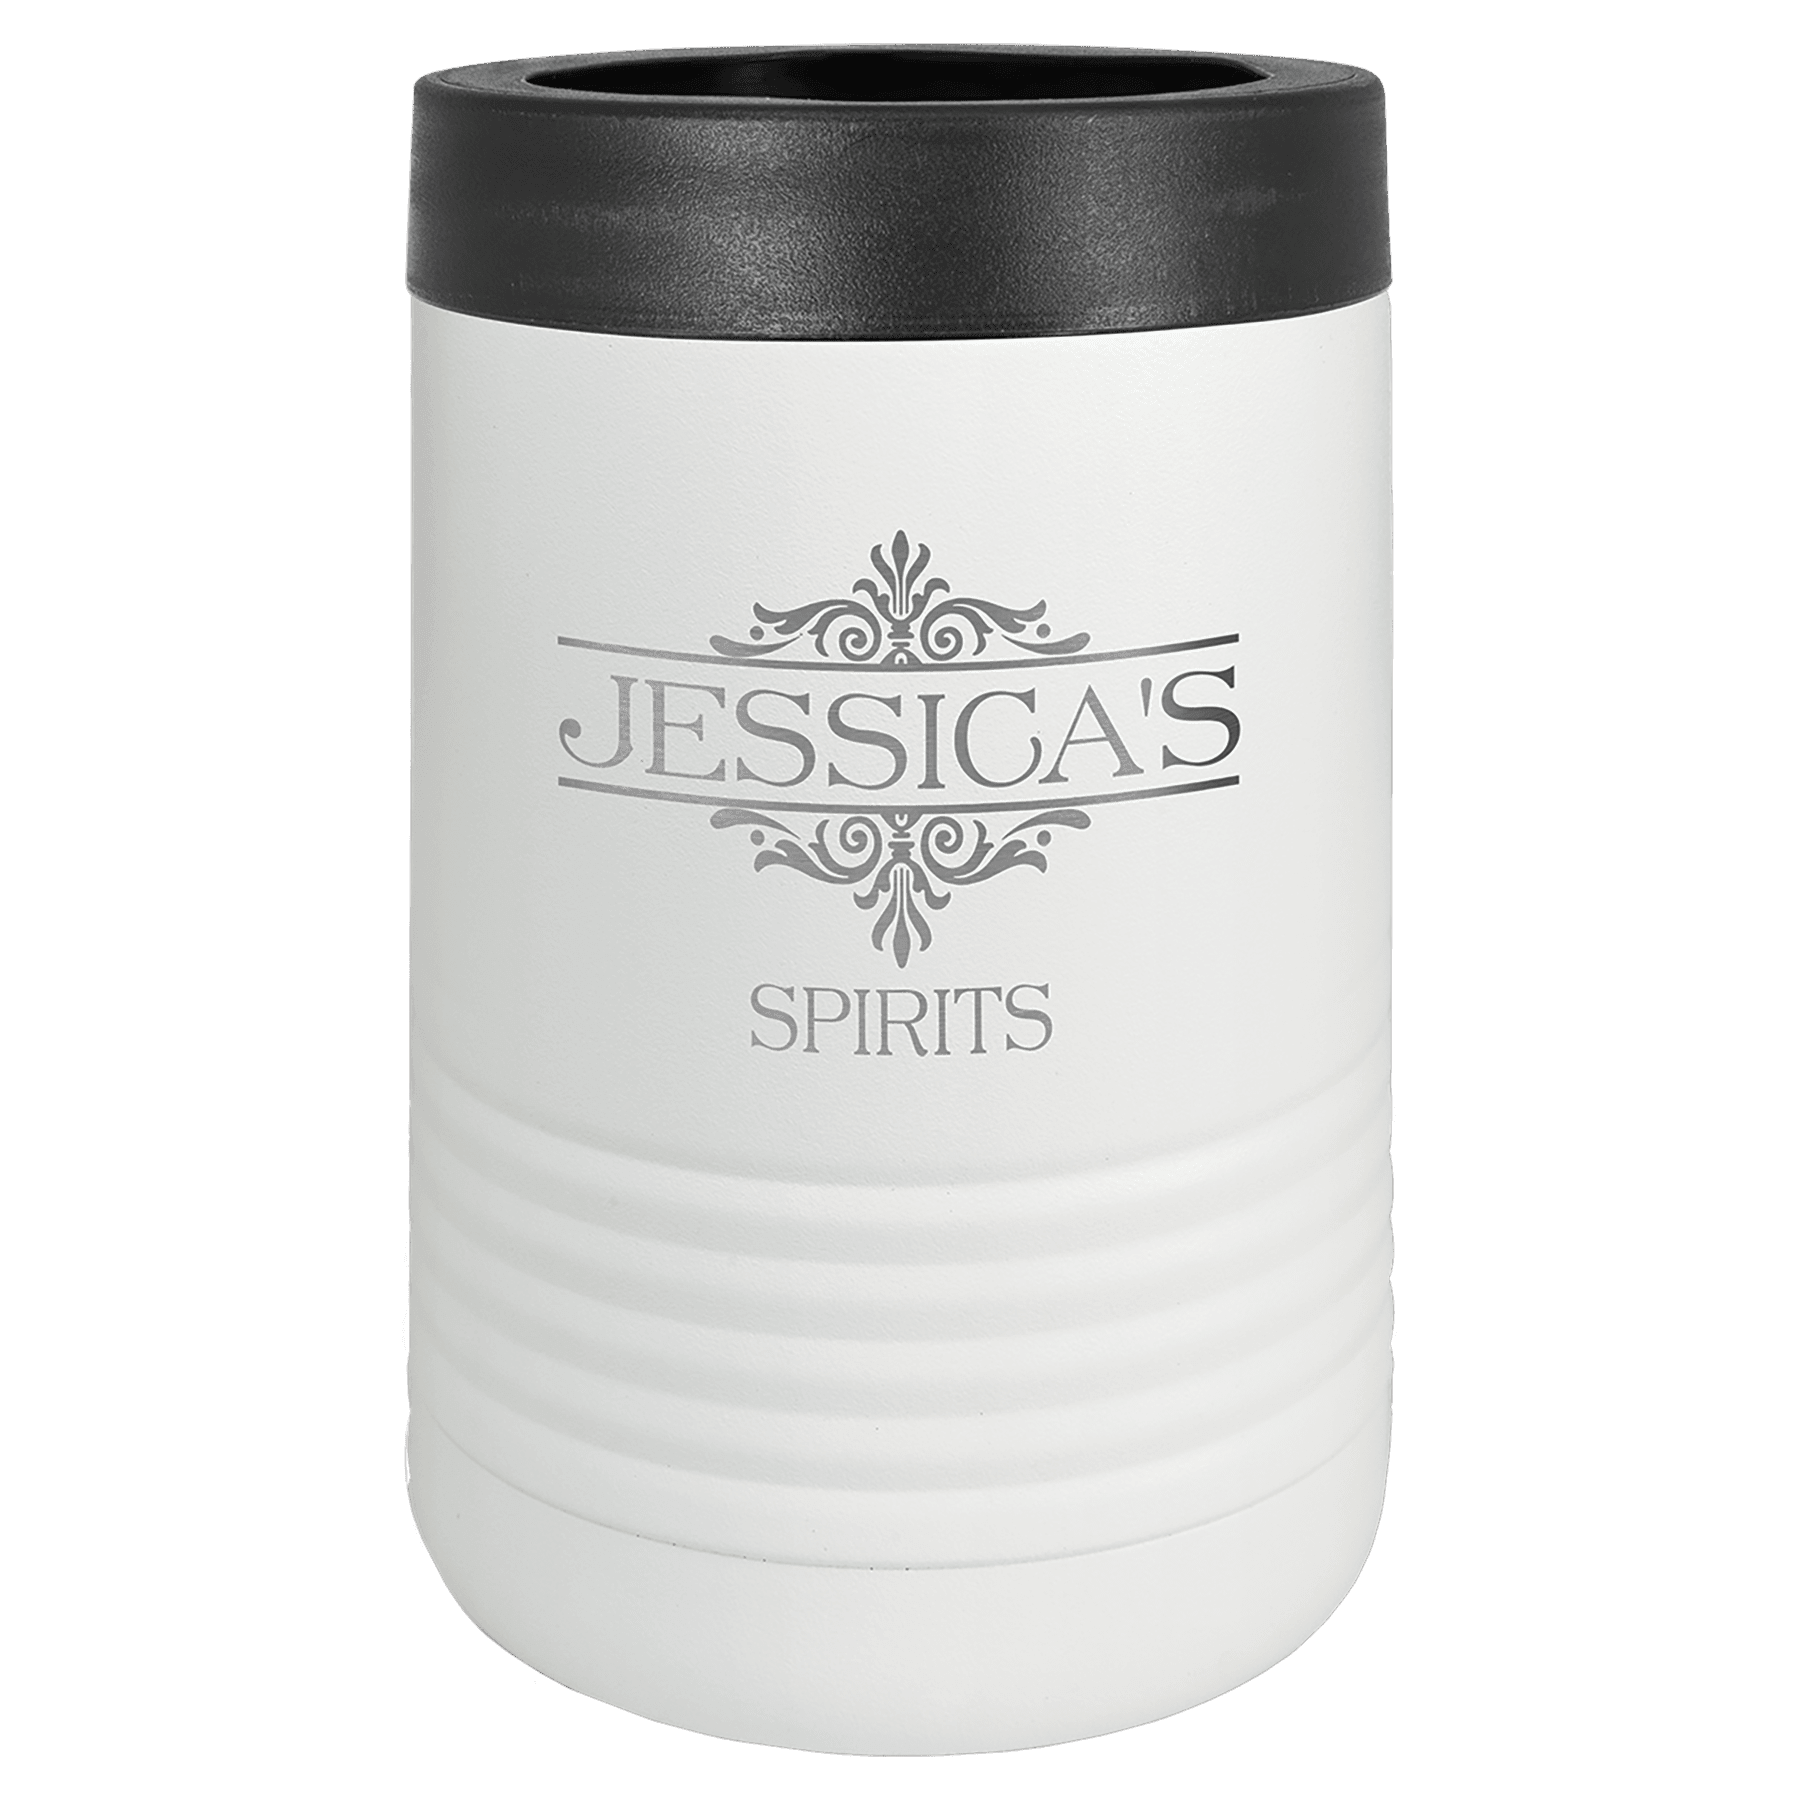 Standard Vacuum Insulated Beverage Holder with Custom Engraving by Polar Camel - The Rutile Ltd